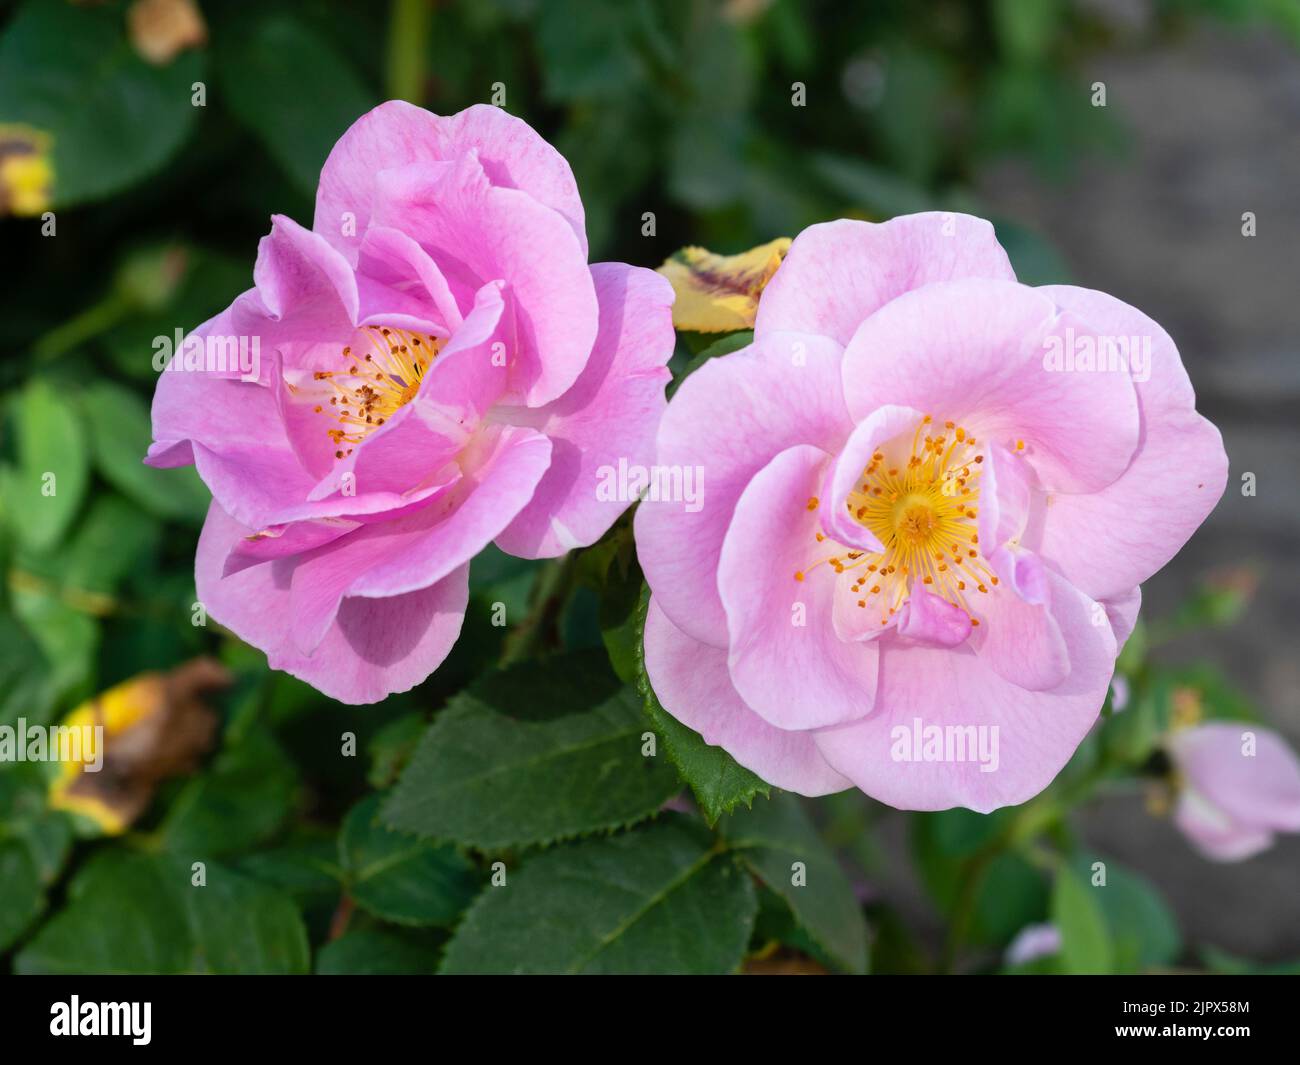 Pink, semi-double fragrant flowers of the repeat blooming shrub rose, Rose 'Lucky!' Stock Photo